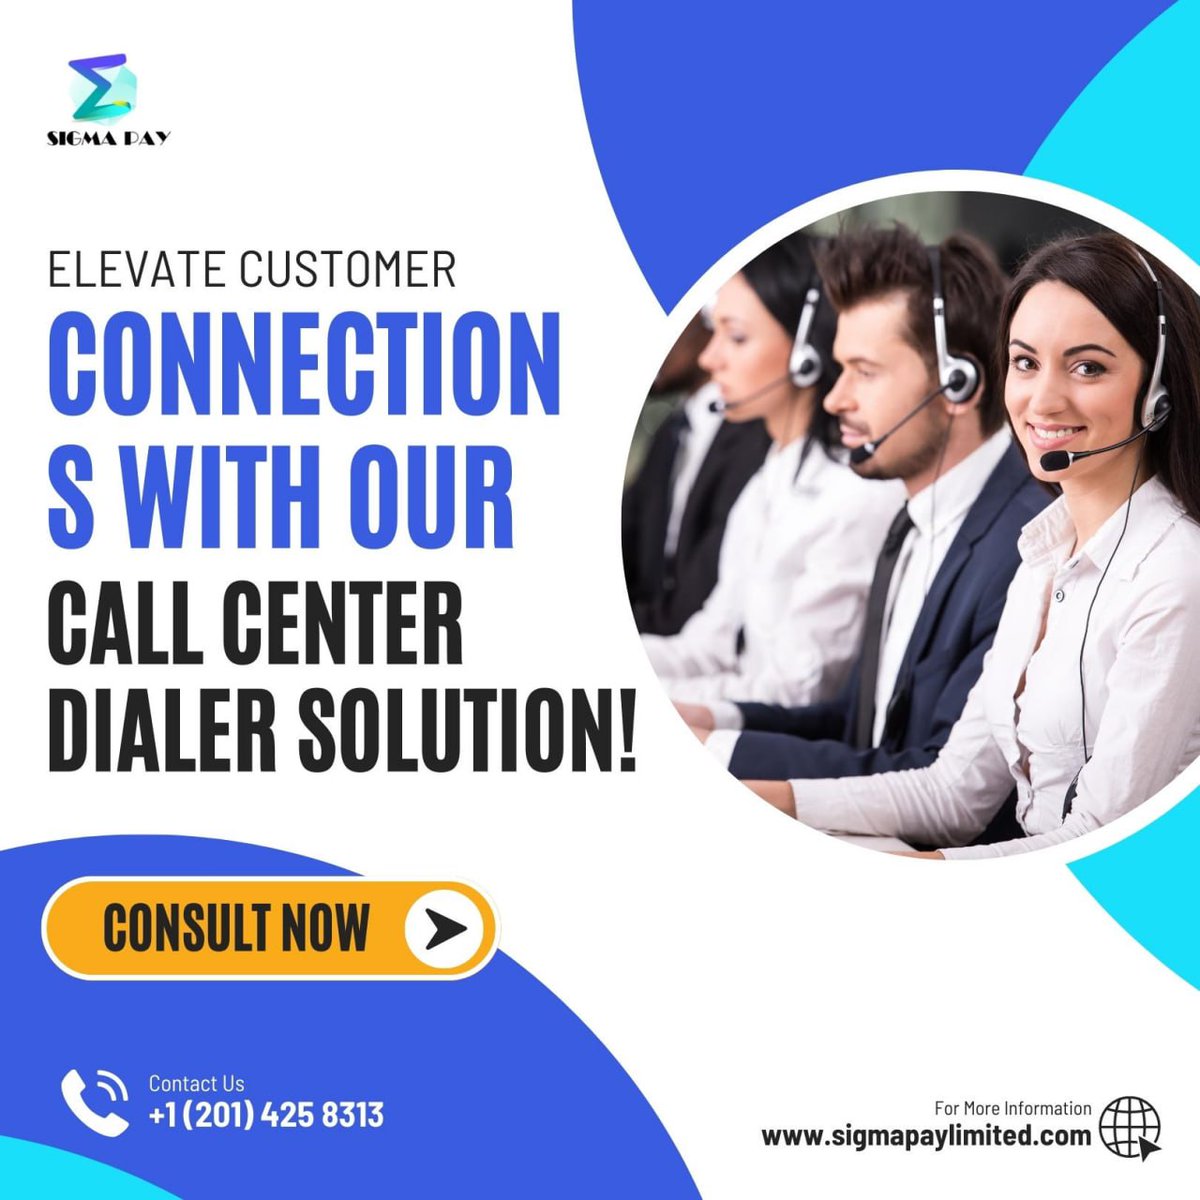 Unlock the potential of personalized conversations with our Call Center Dialer Solution. Elevate your customer connections and witness the impact firsthand.  #PersonalizedEngagement #DialerImpact #Sigmapay